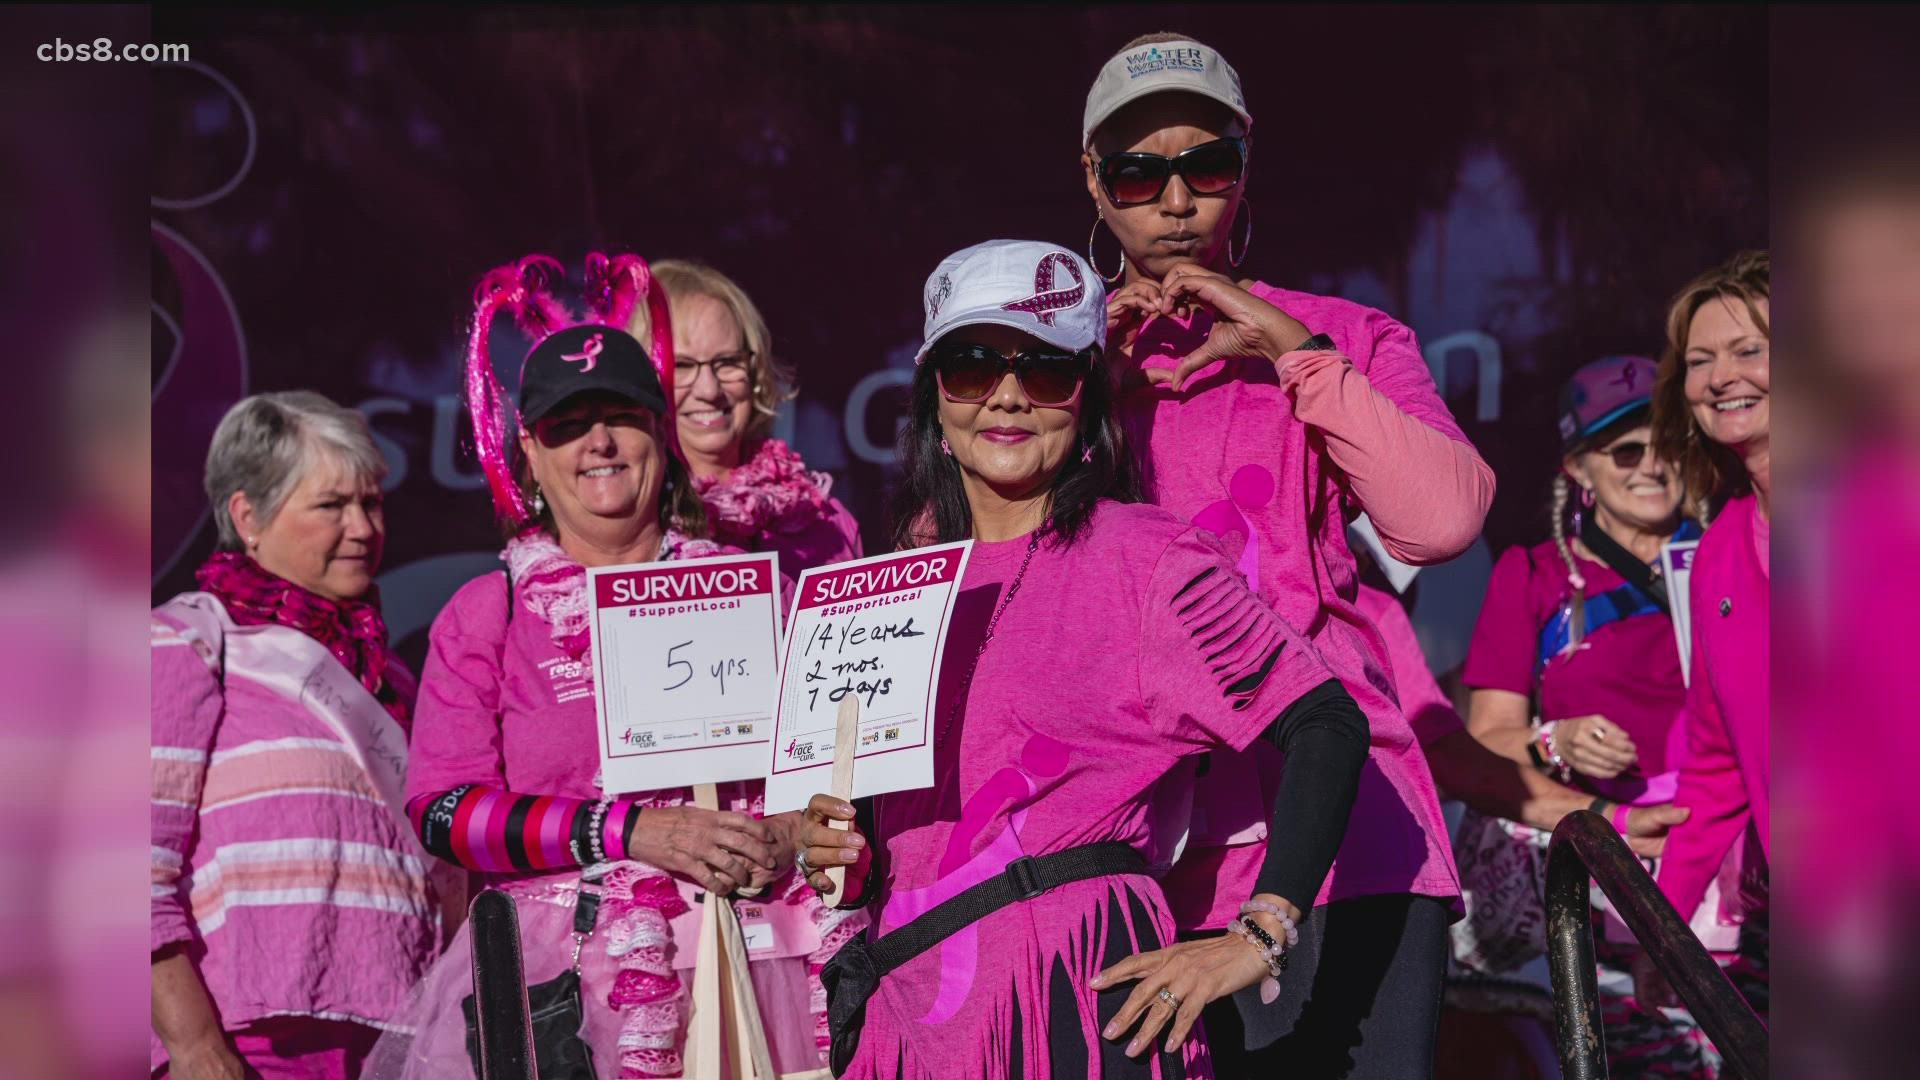 One in every eight women will be diagnosed with breast cancer in their lifetime and helping in the fight against the disease is the Susan G Komen Foundation.